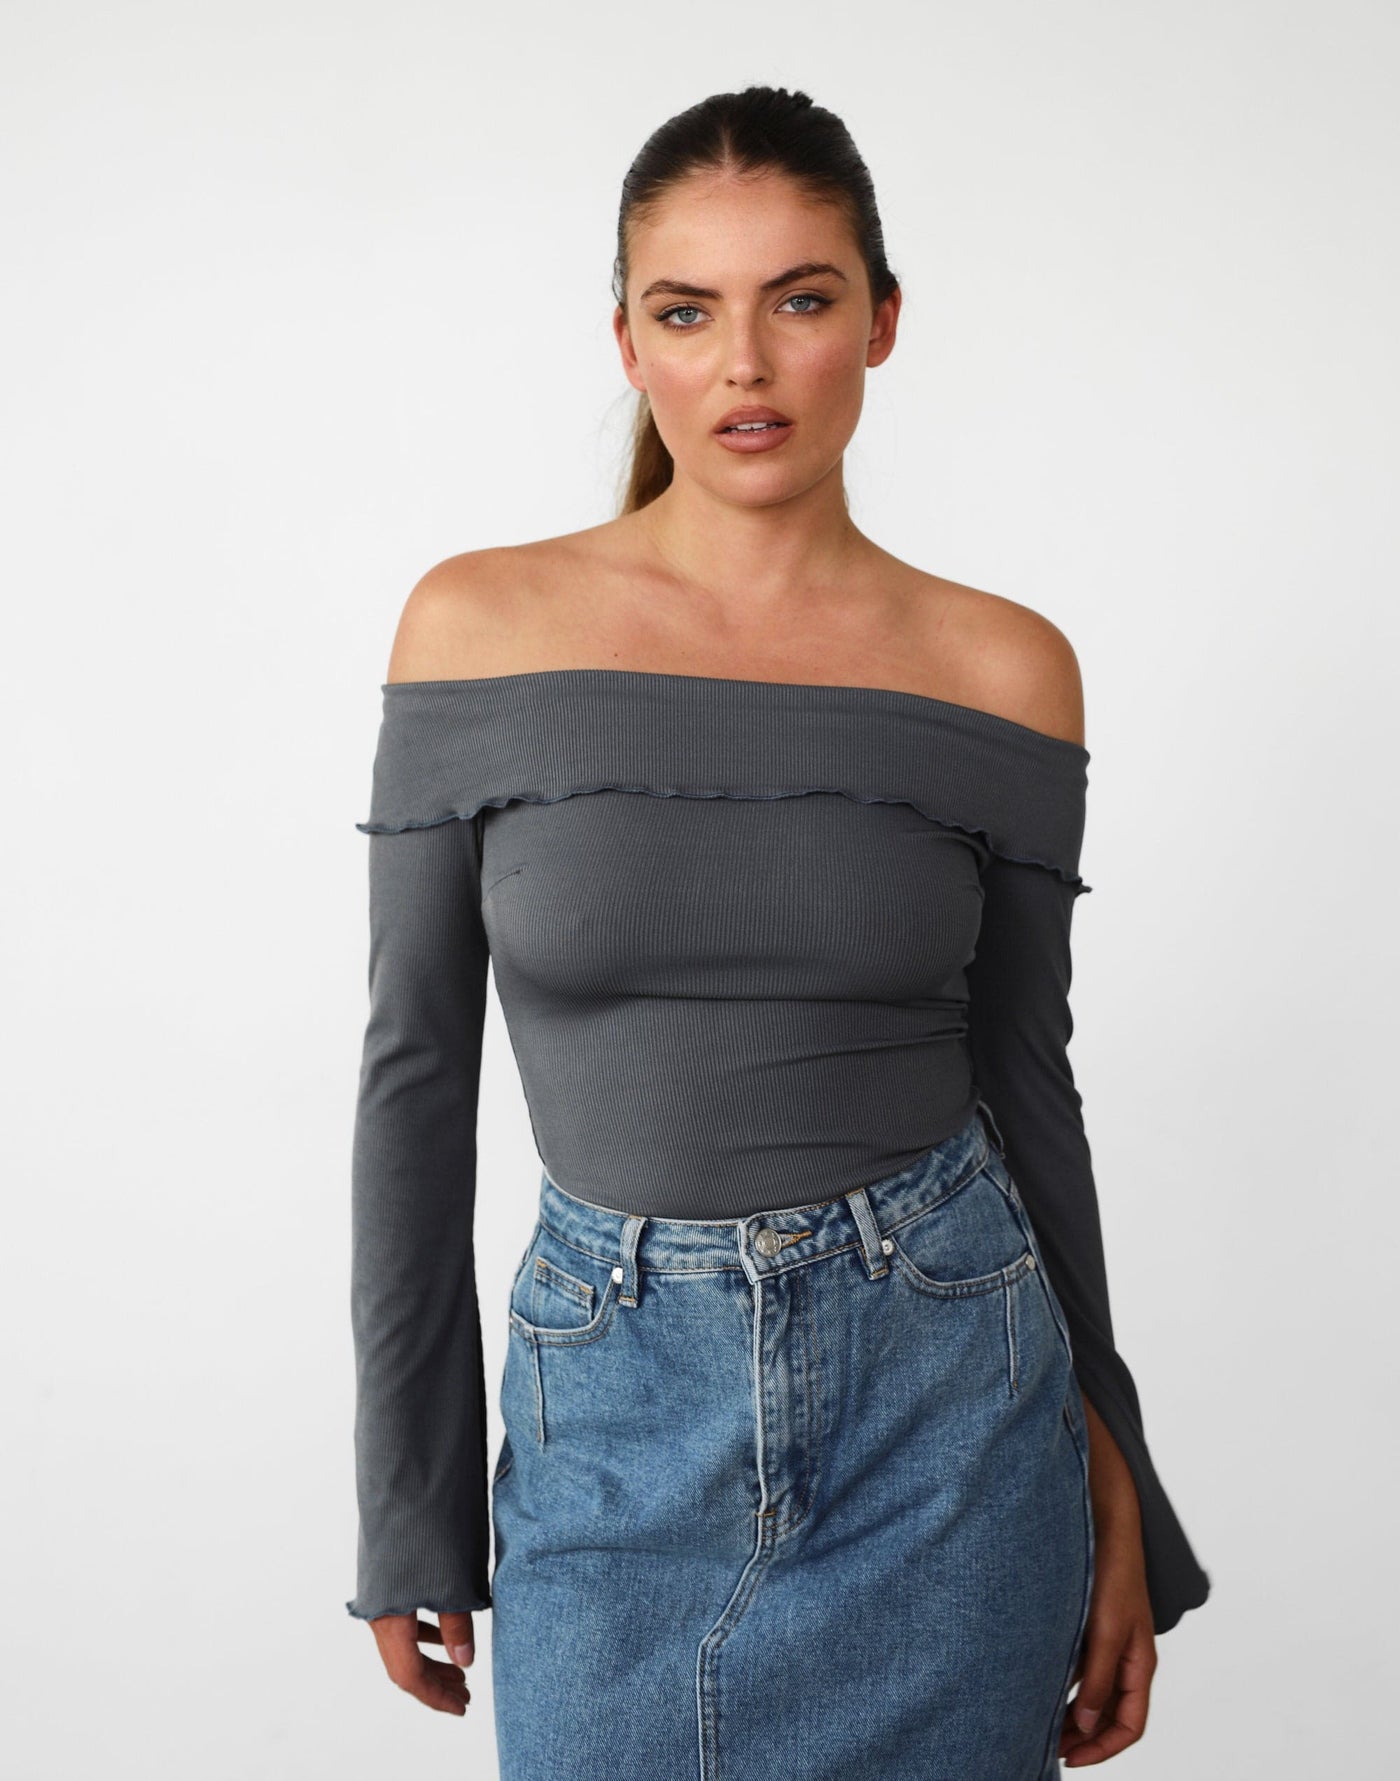 Jess Long Sleeve Top (Charcoal) - Off the Shoulder Flared Sleeve Top - Women's Top - Charcoal Clothing